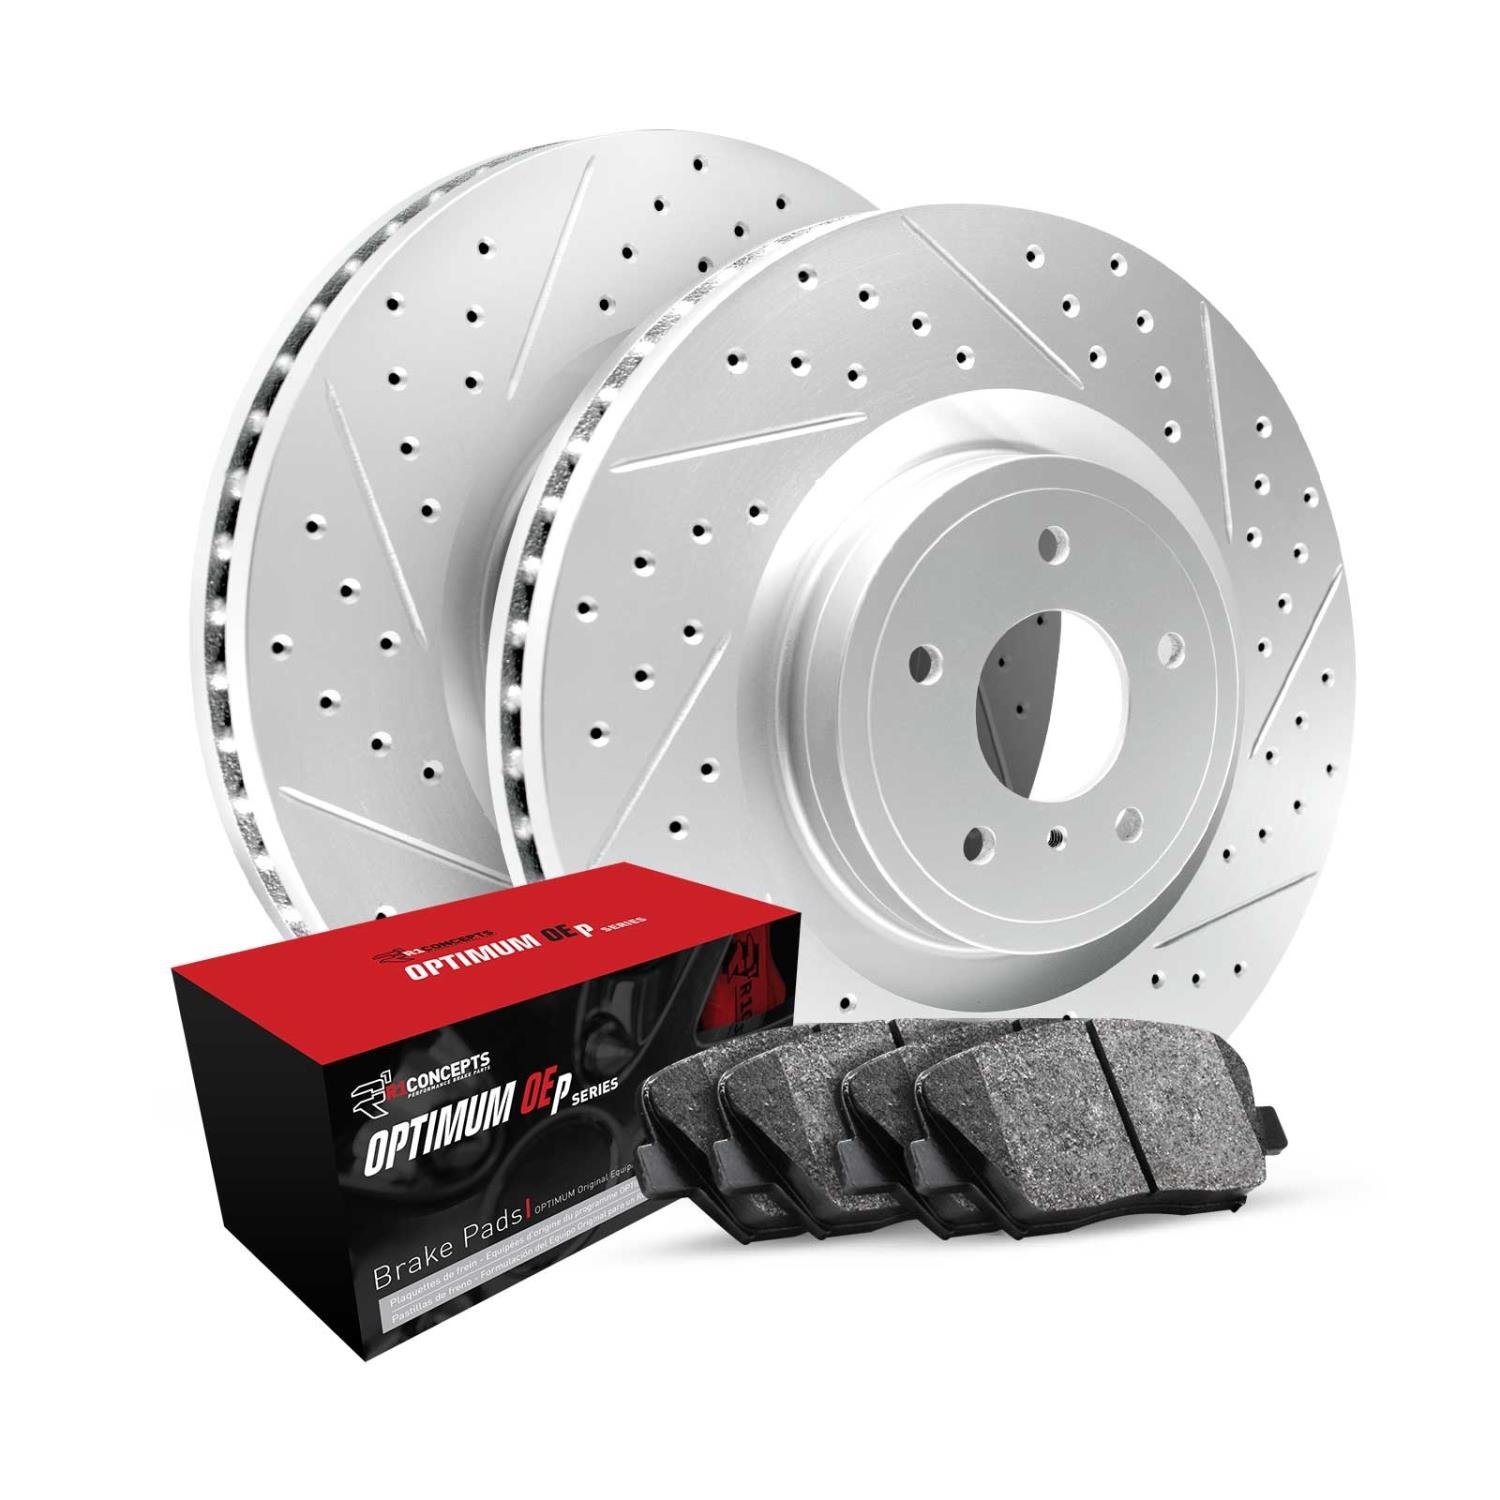 GEO-Carbon Drilled & Slotted Brake Rotor Set w/Optimum OE Pads, 1991-1999 Fits Multiple Makes/Models, Position: Rear